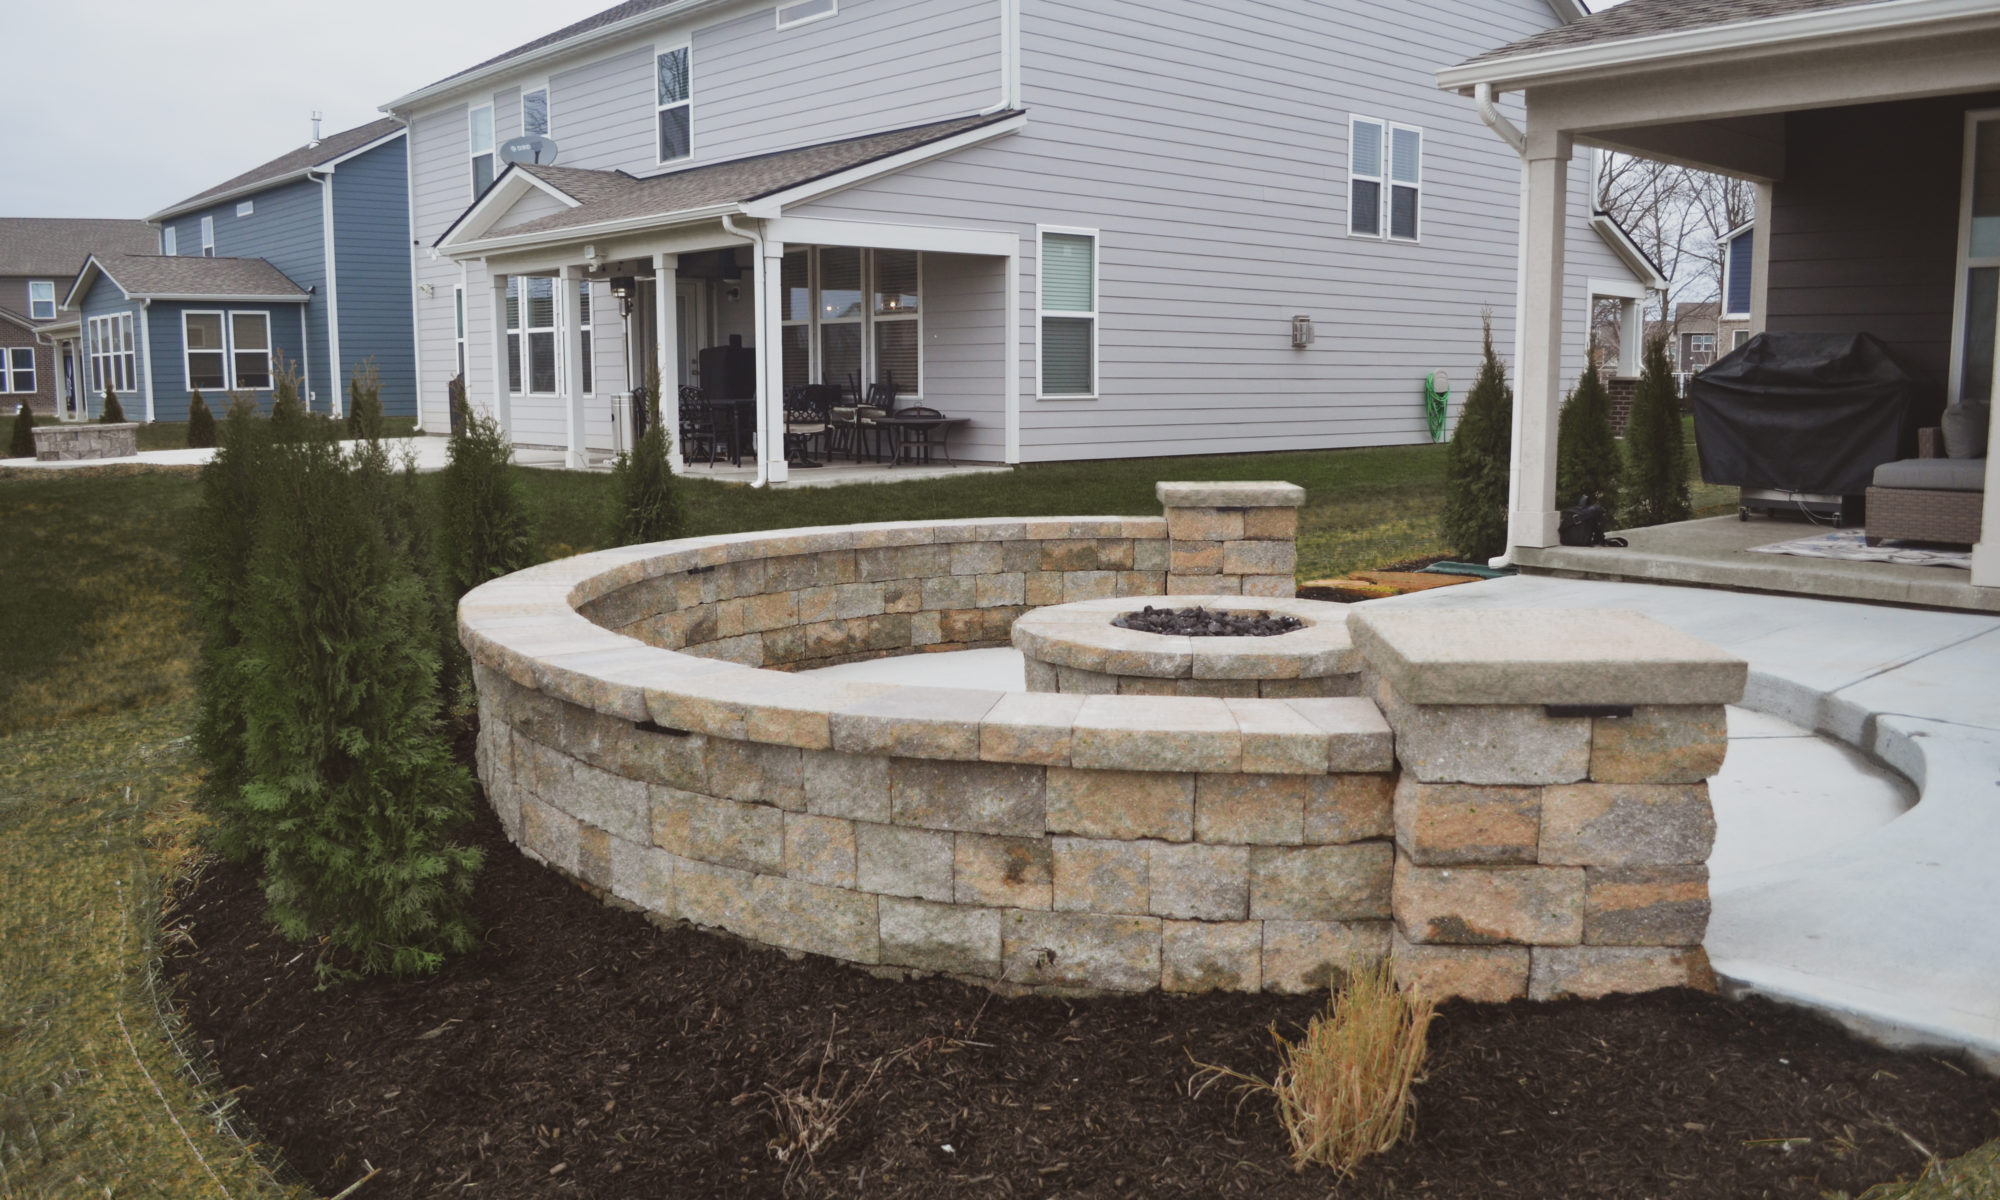 Precision Outdoors Welchel Springs Patio custom landscaping sunken gas firepit fire pit modern cedar pergola metal accents concrete patio swinging daybed day bed day swing fishers indiana beautiful backyard